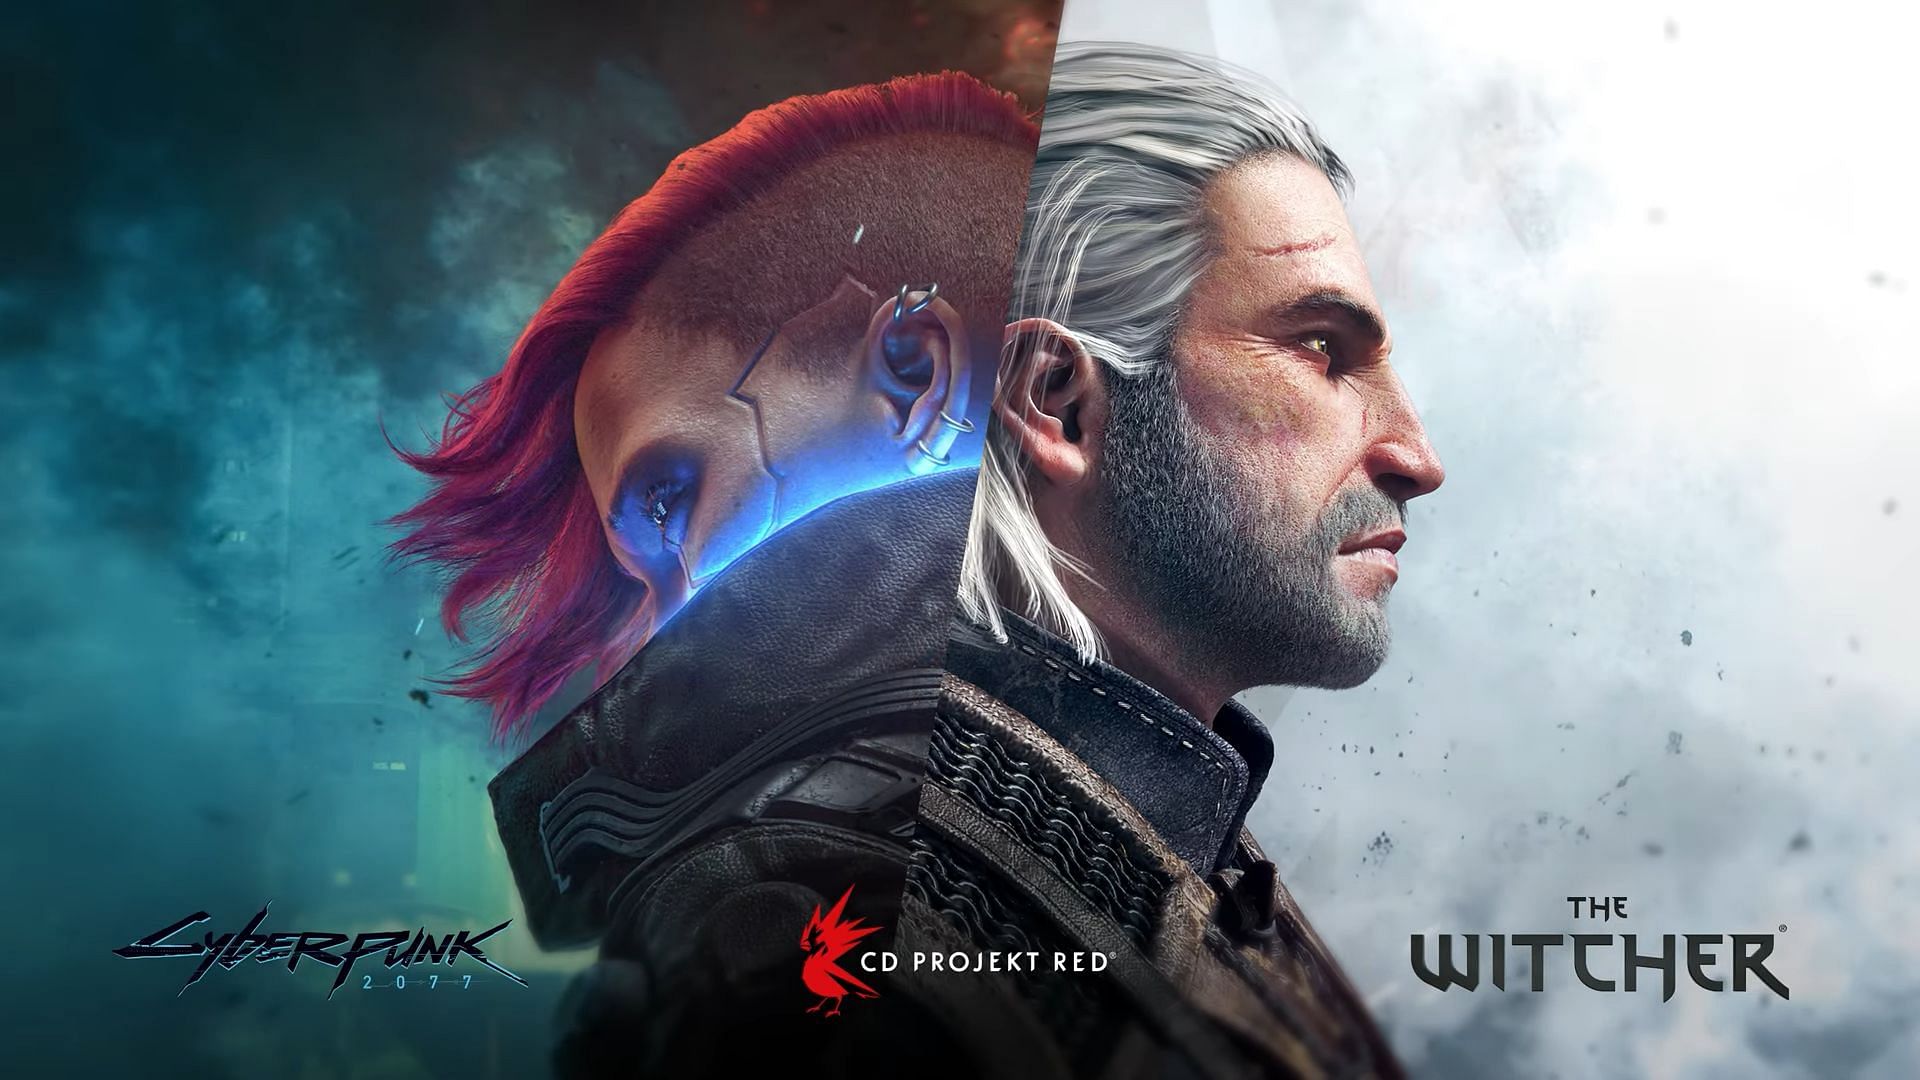 New Witcher Cyberpunk 2077 sequel officially announced by CD Projekt